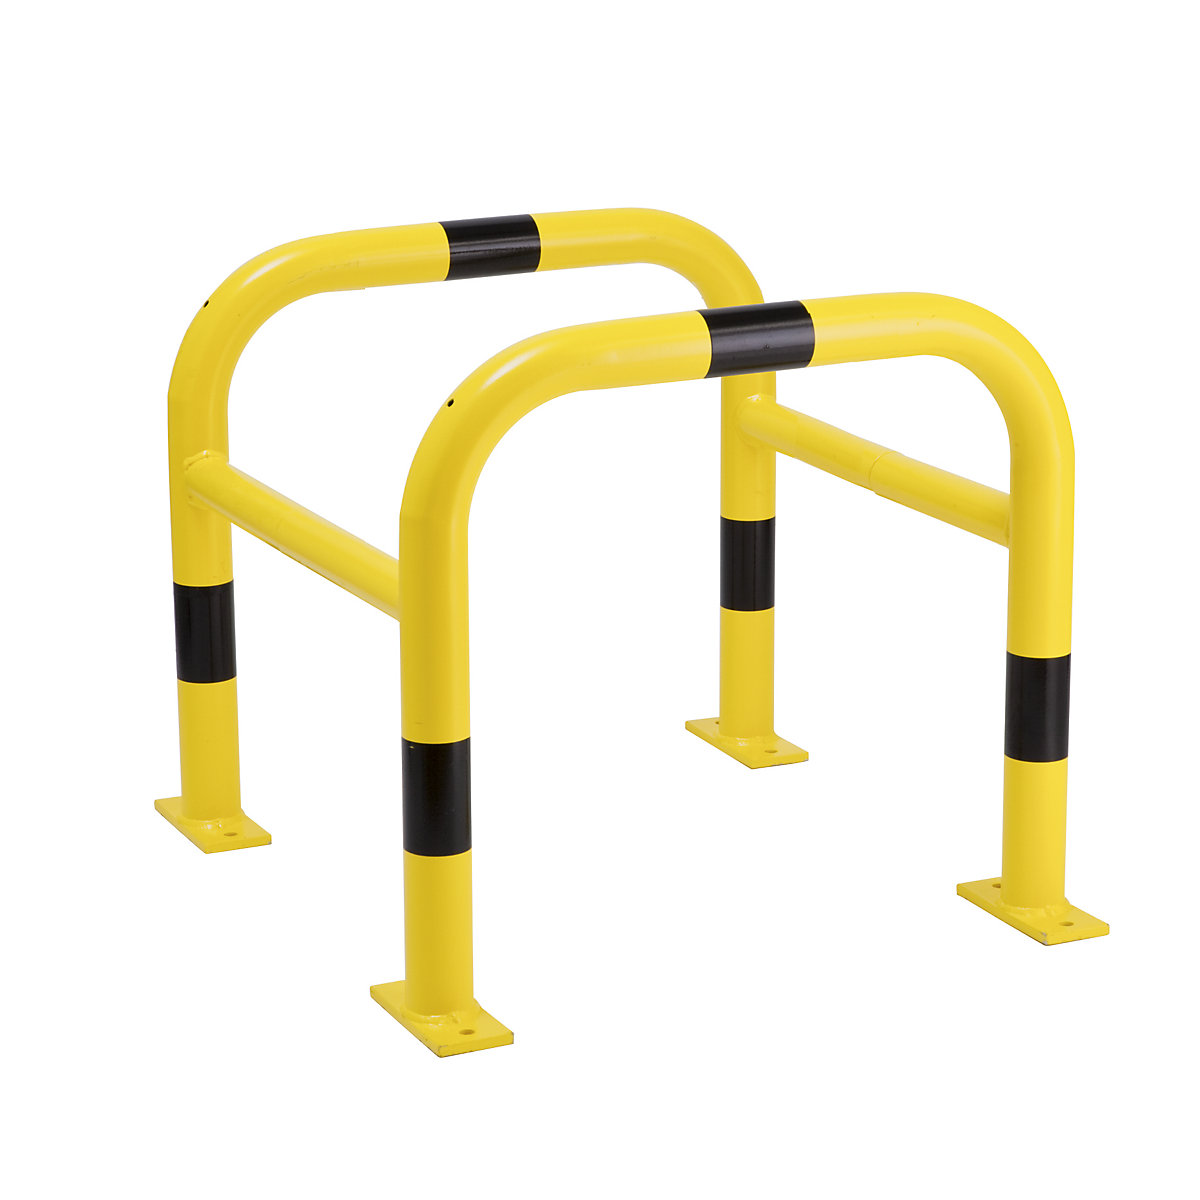 Crash protection for posts, galvanised and plastic coated, HxWxD 600 x 720 x 720 mm-3